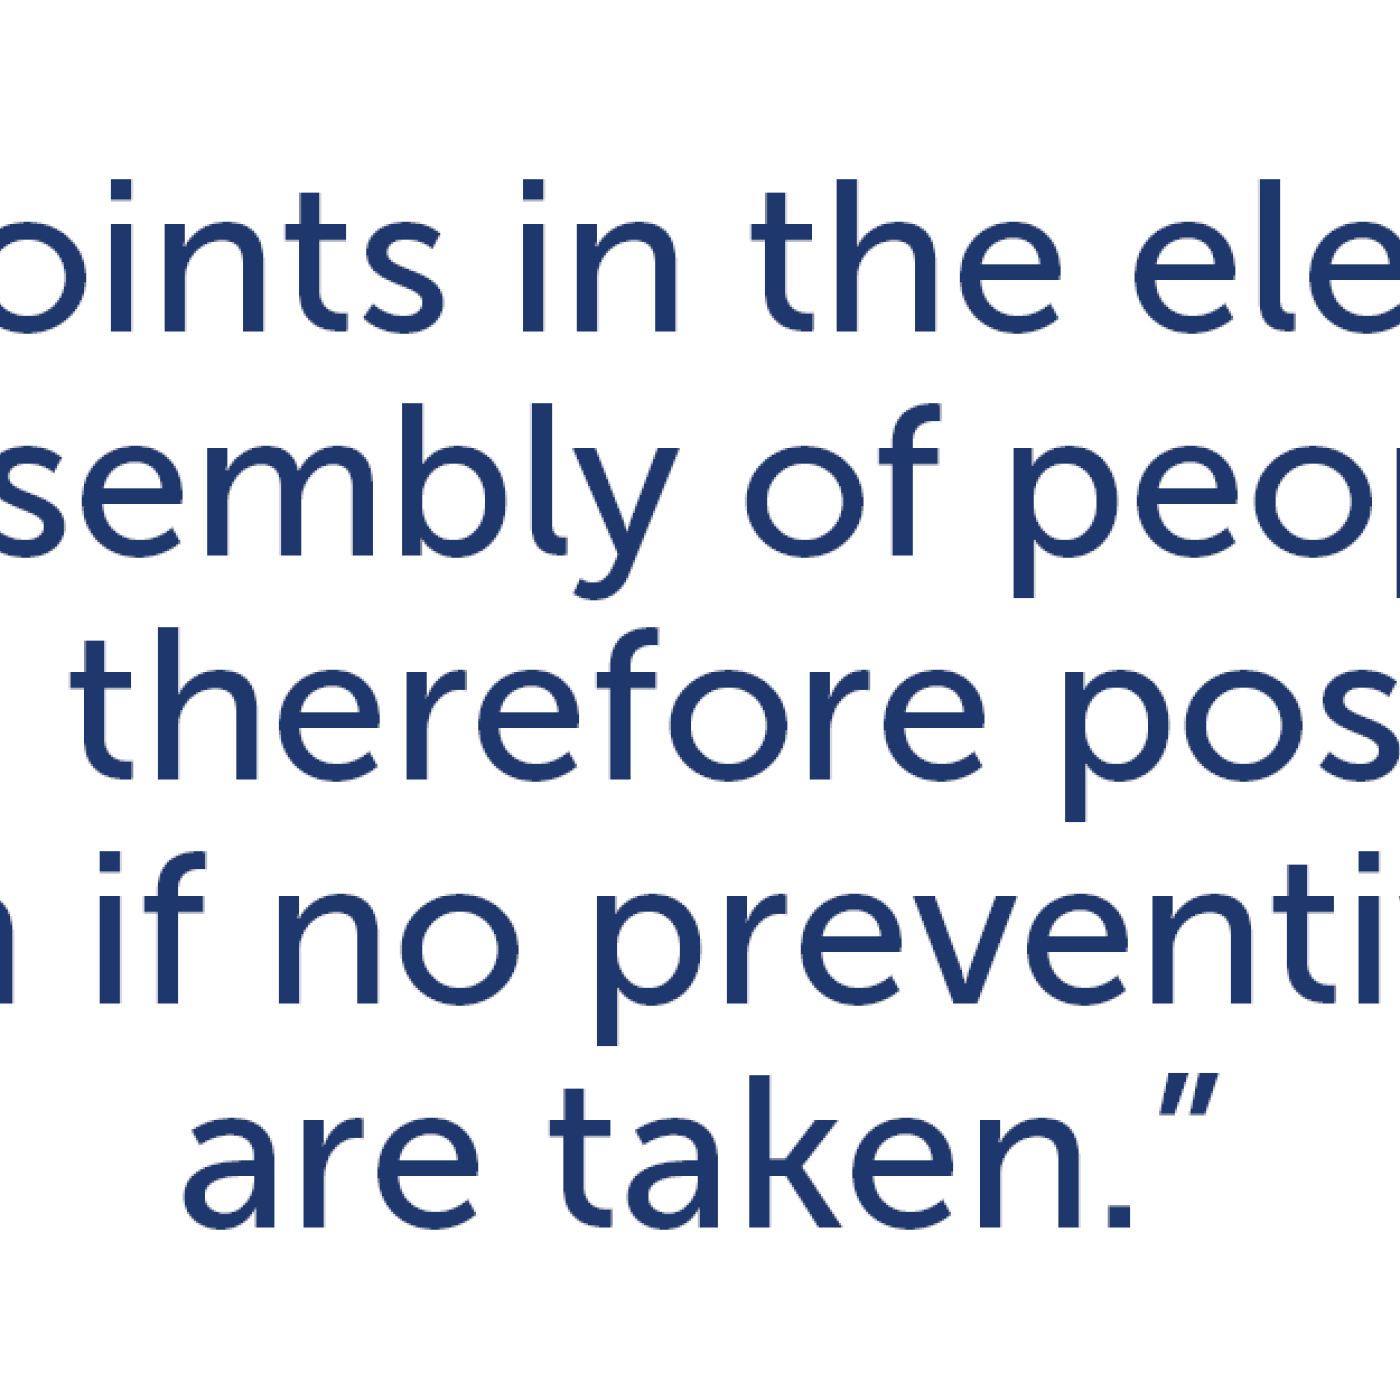 “More than 40 points in the electoral processes involve the assembly of people or transfer of objects and therefore pose risks of virus transmission if no preventive measures are taken.” 